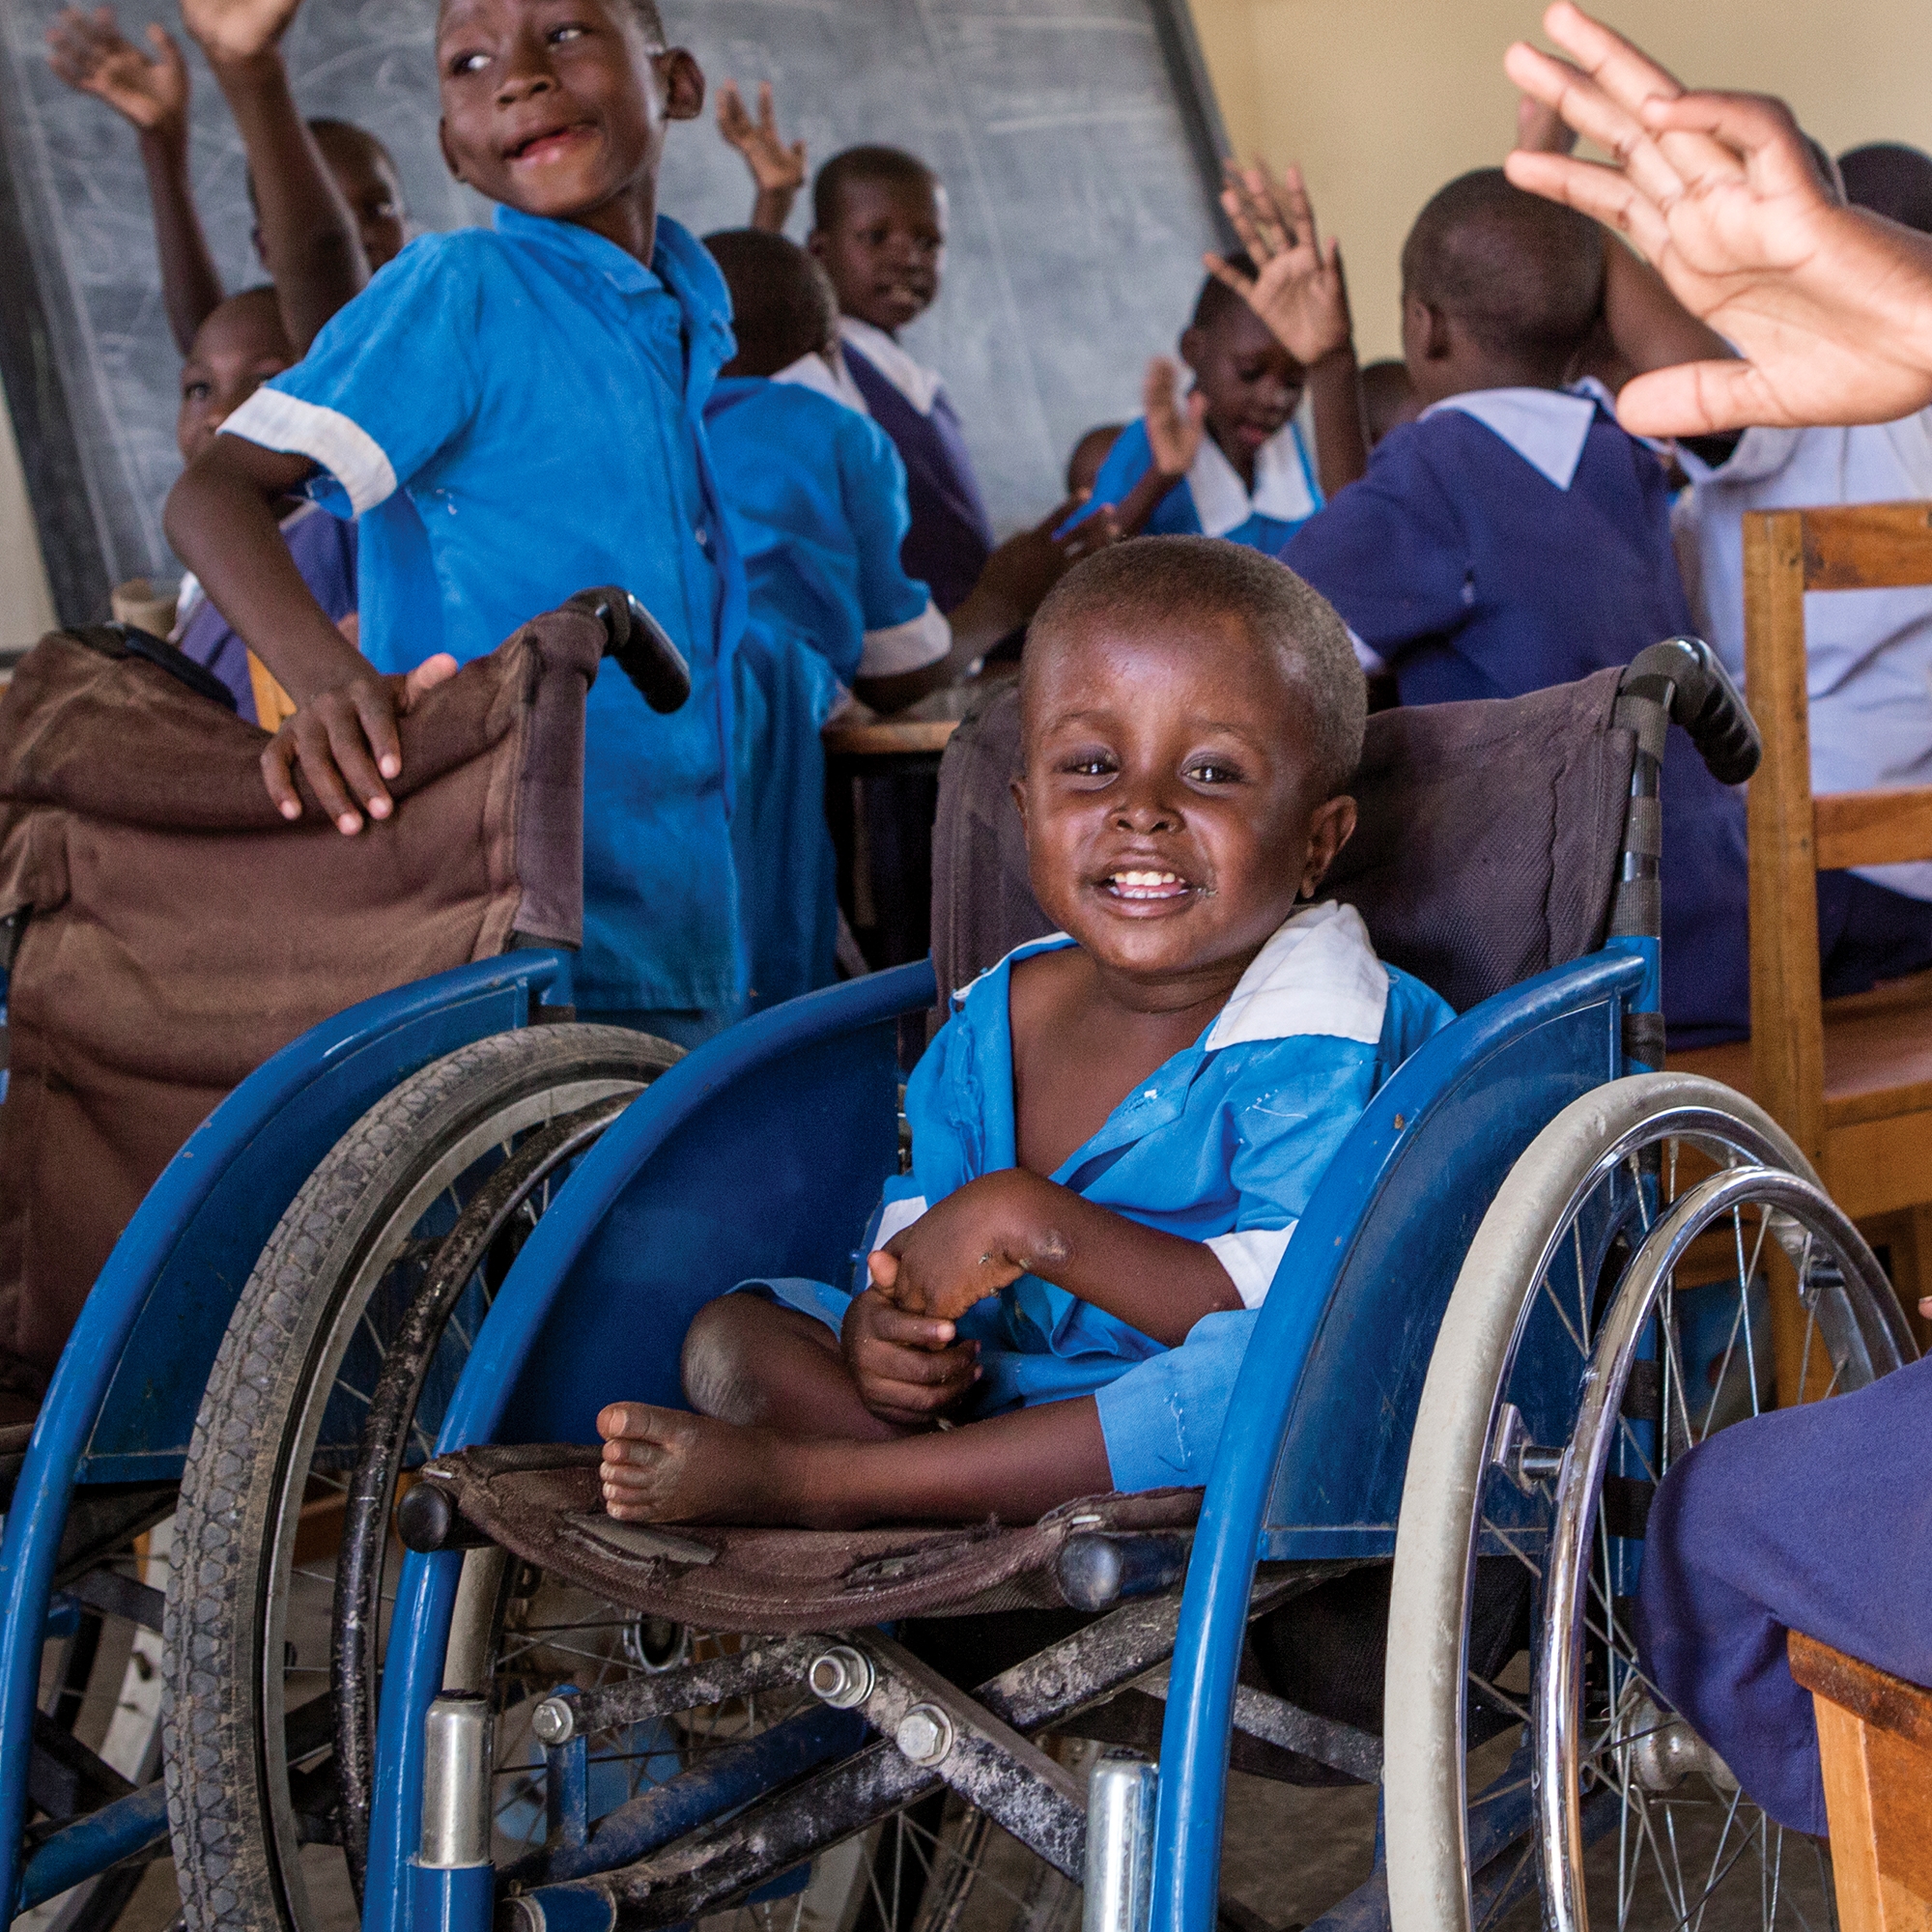 A classroom visit at St. John Paul II Home for Physical Impairment in Lokichar, Kenya. Save the Children partners with the center, to support outreach activities, identify children with disabilities and spread awareness and acceptance in their communities. Save the Children also pays for adaptive items that can help them lead normal lives such as prosthetic limbs, walking aids and specialized shoes. Photo credit: Jonathan Hyams/Save the Children, June 2016.